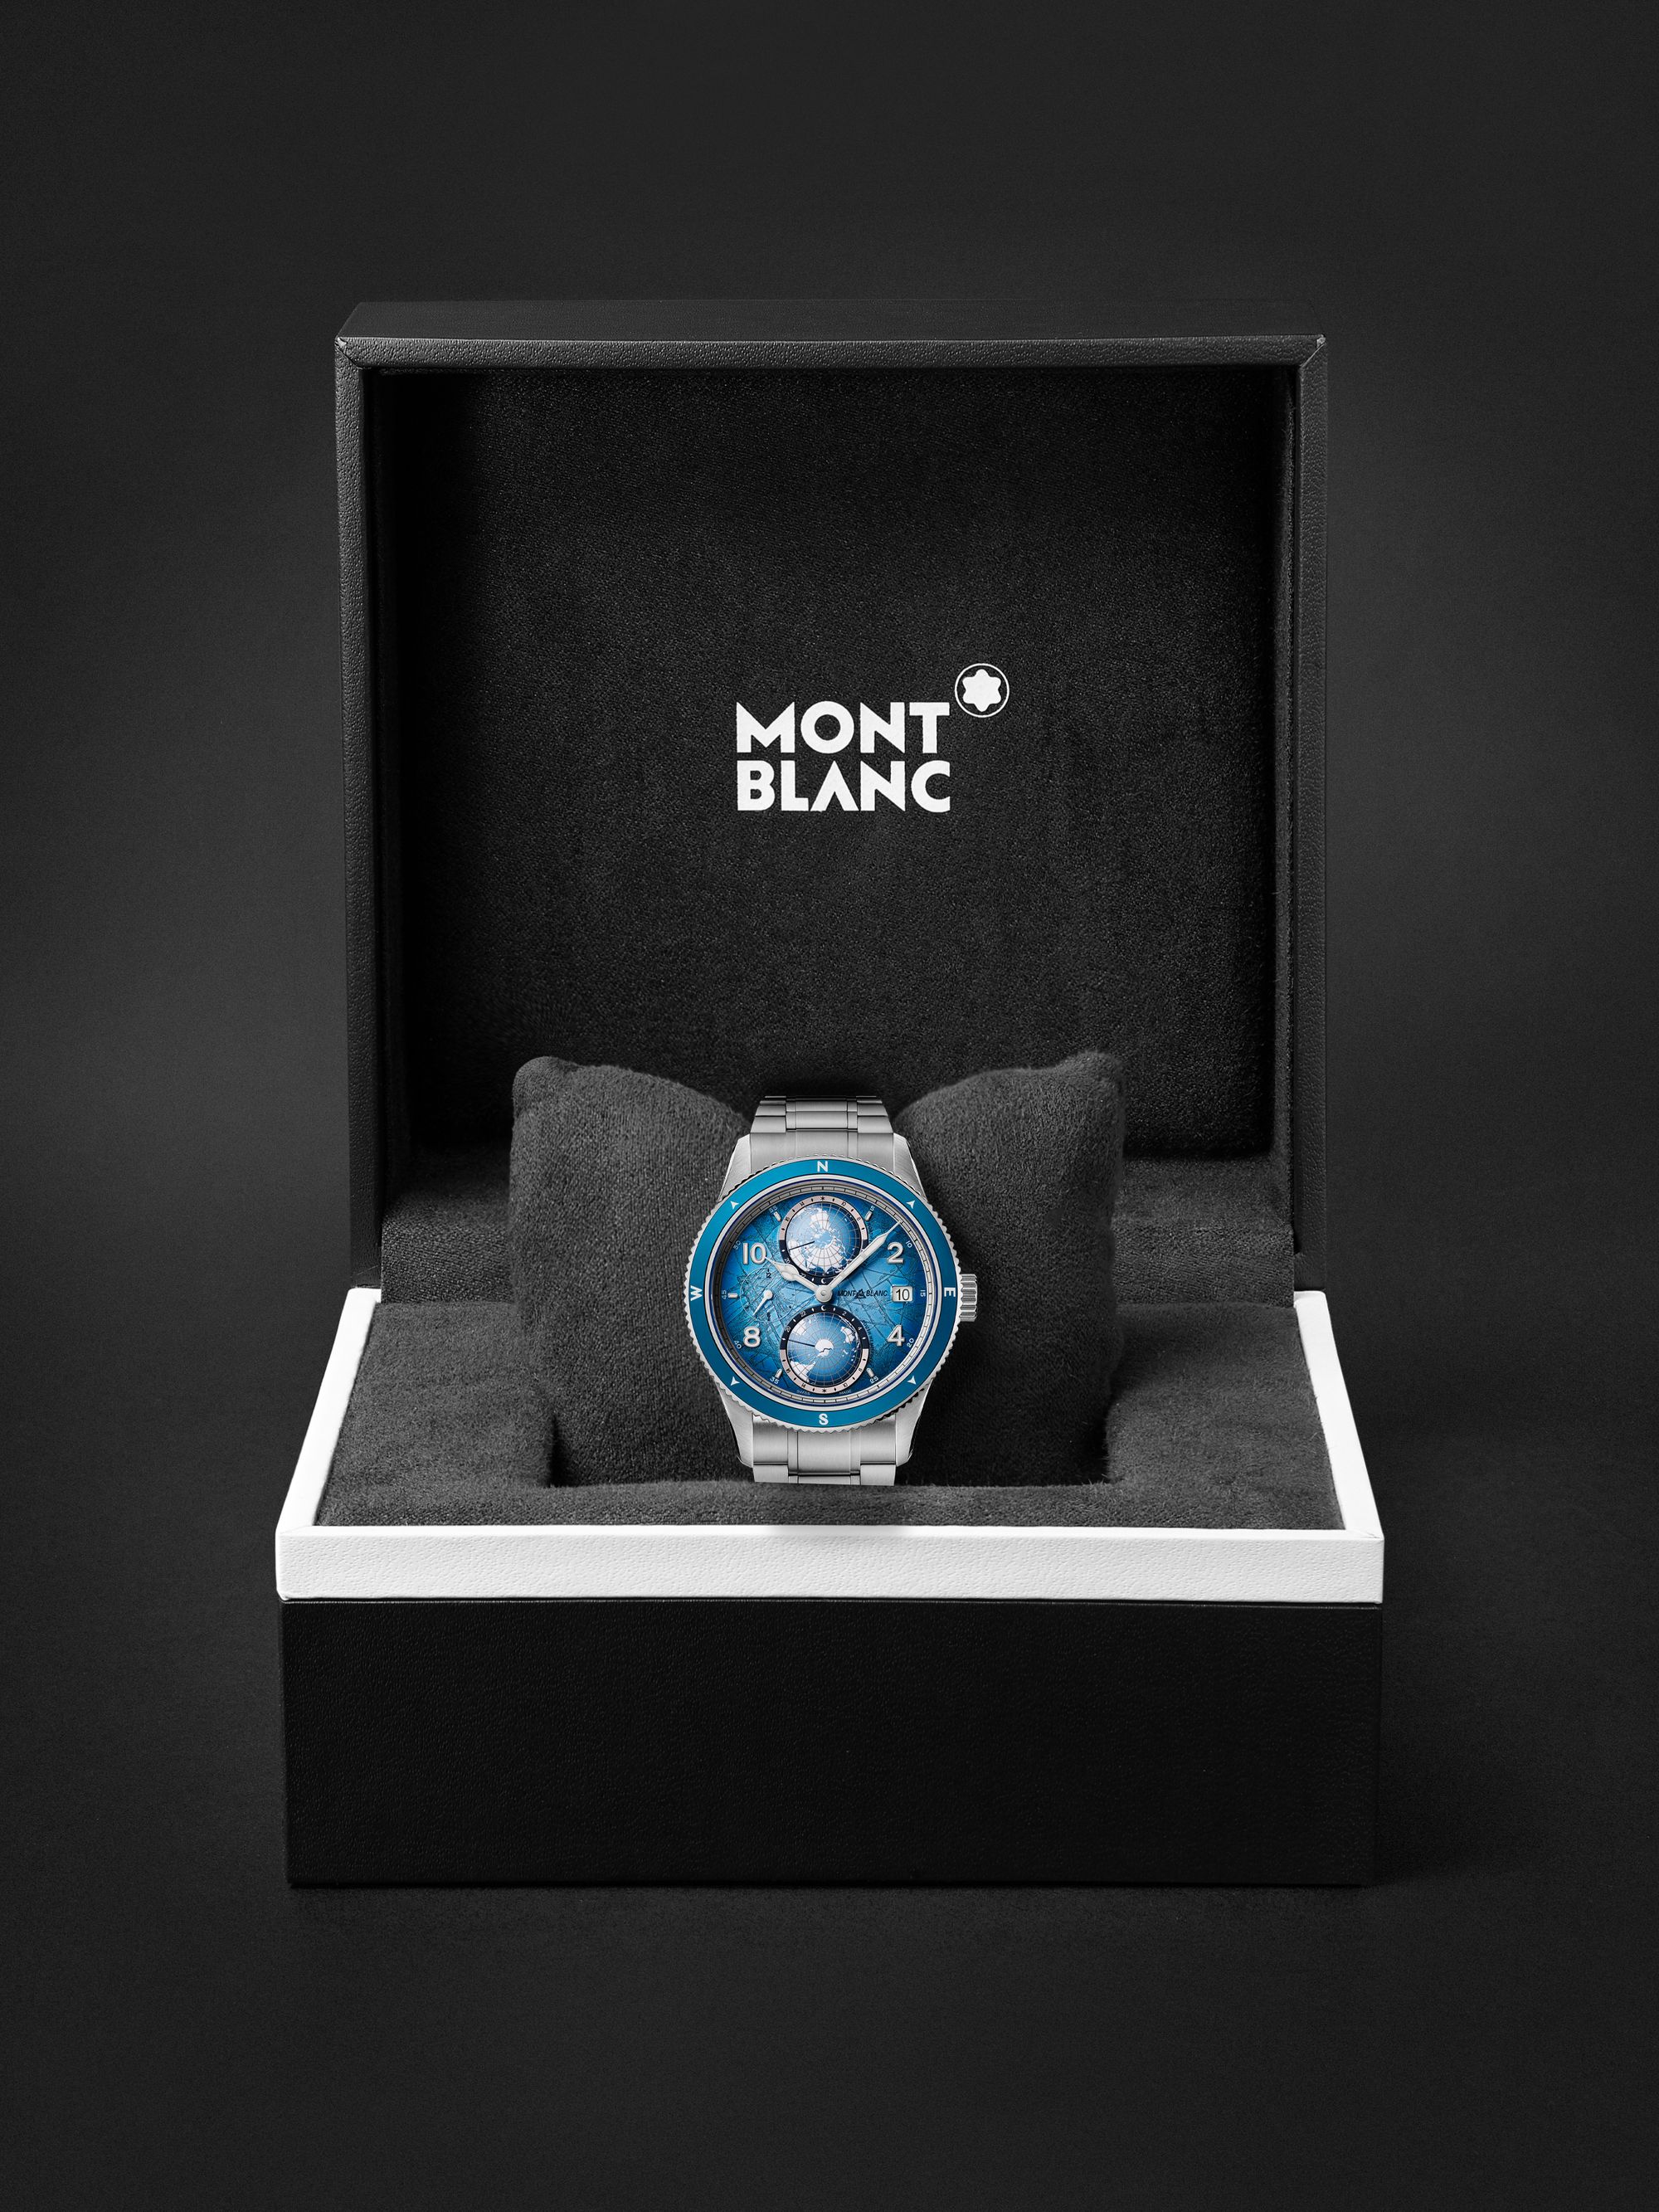 MONTBLANC 1858 Geosphere 0 Oxygen South Pole Exploration Limited Edition Automatic 42mm Interchangeable Titanium, Ceramic and Canvas Watch, Ref. No. 7612582367544